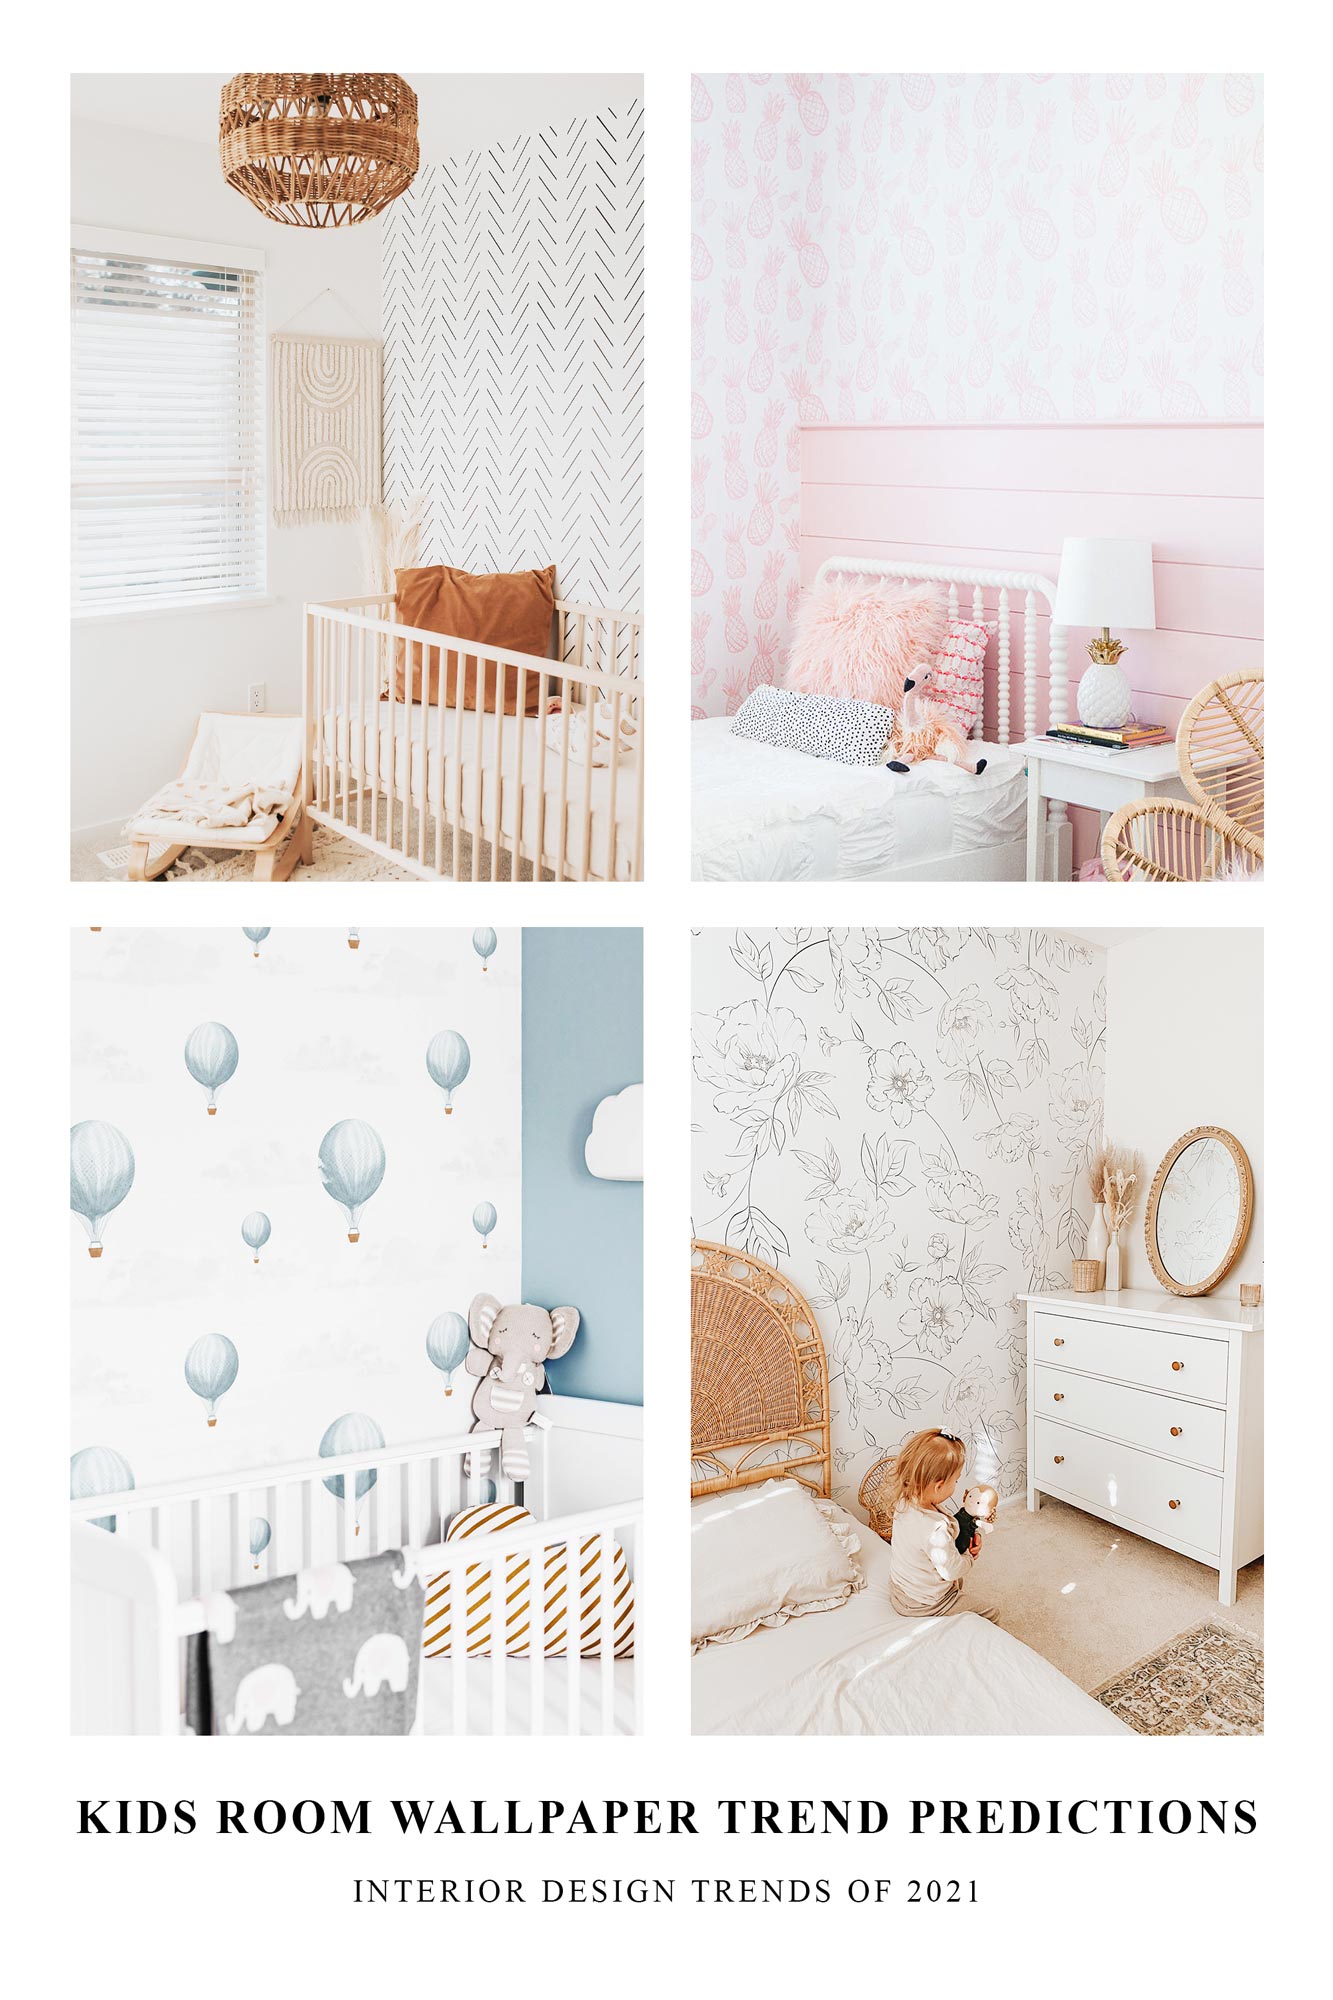 Kids room wallpaper trend predictions for 2021